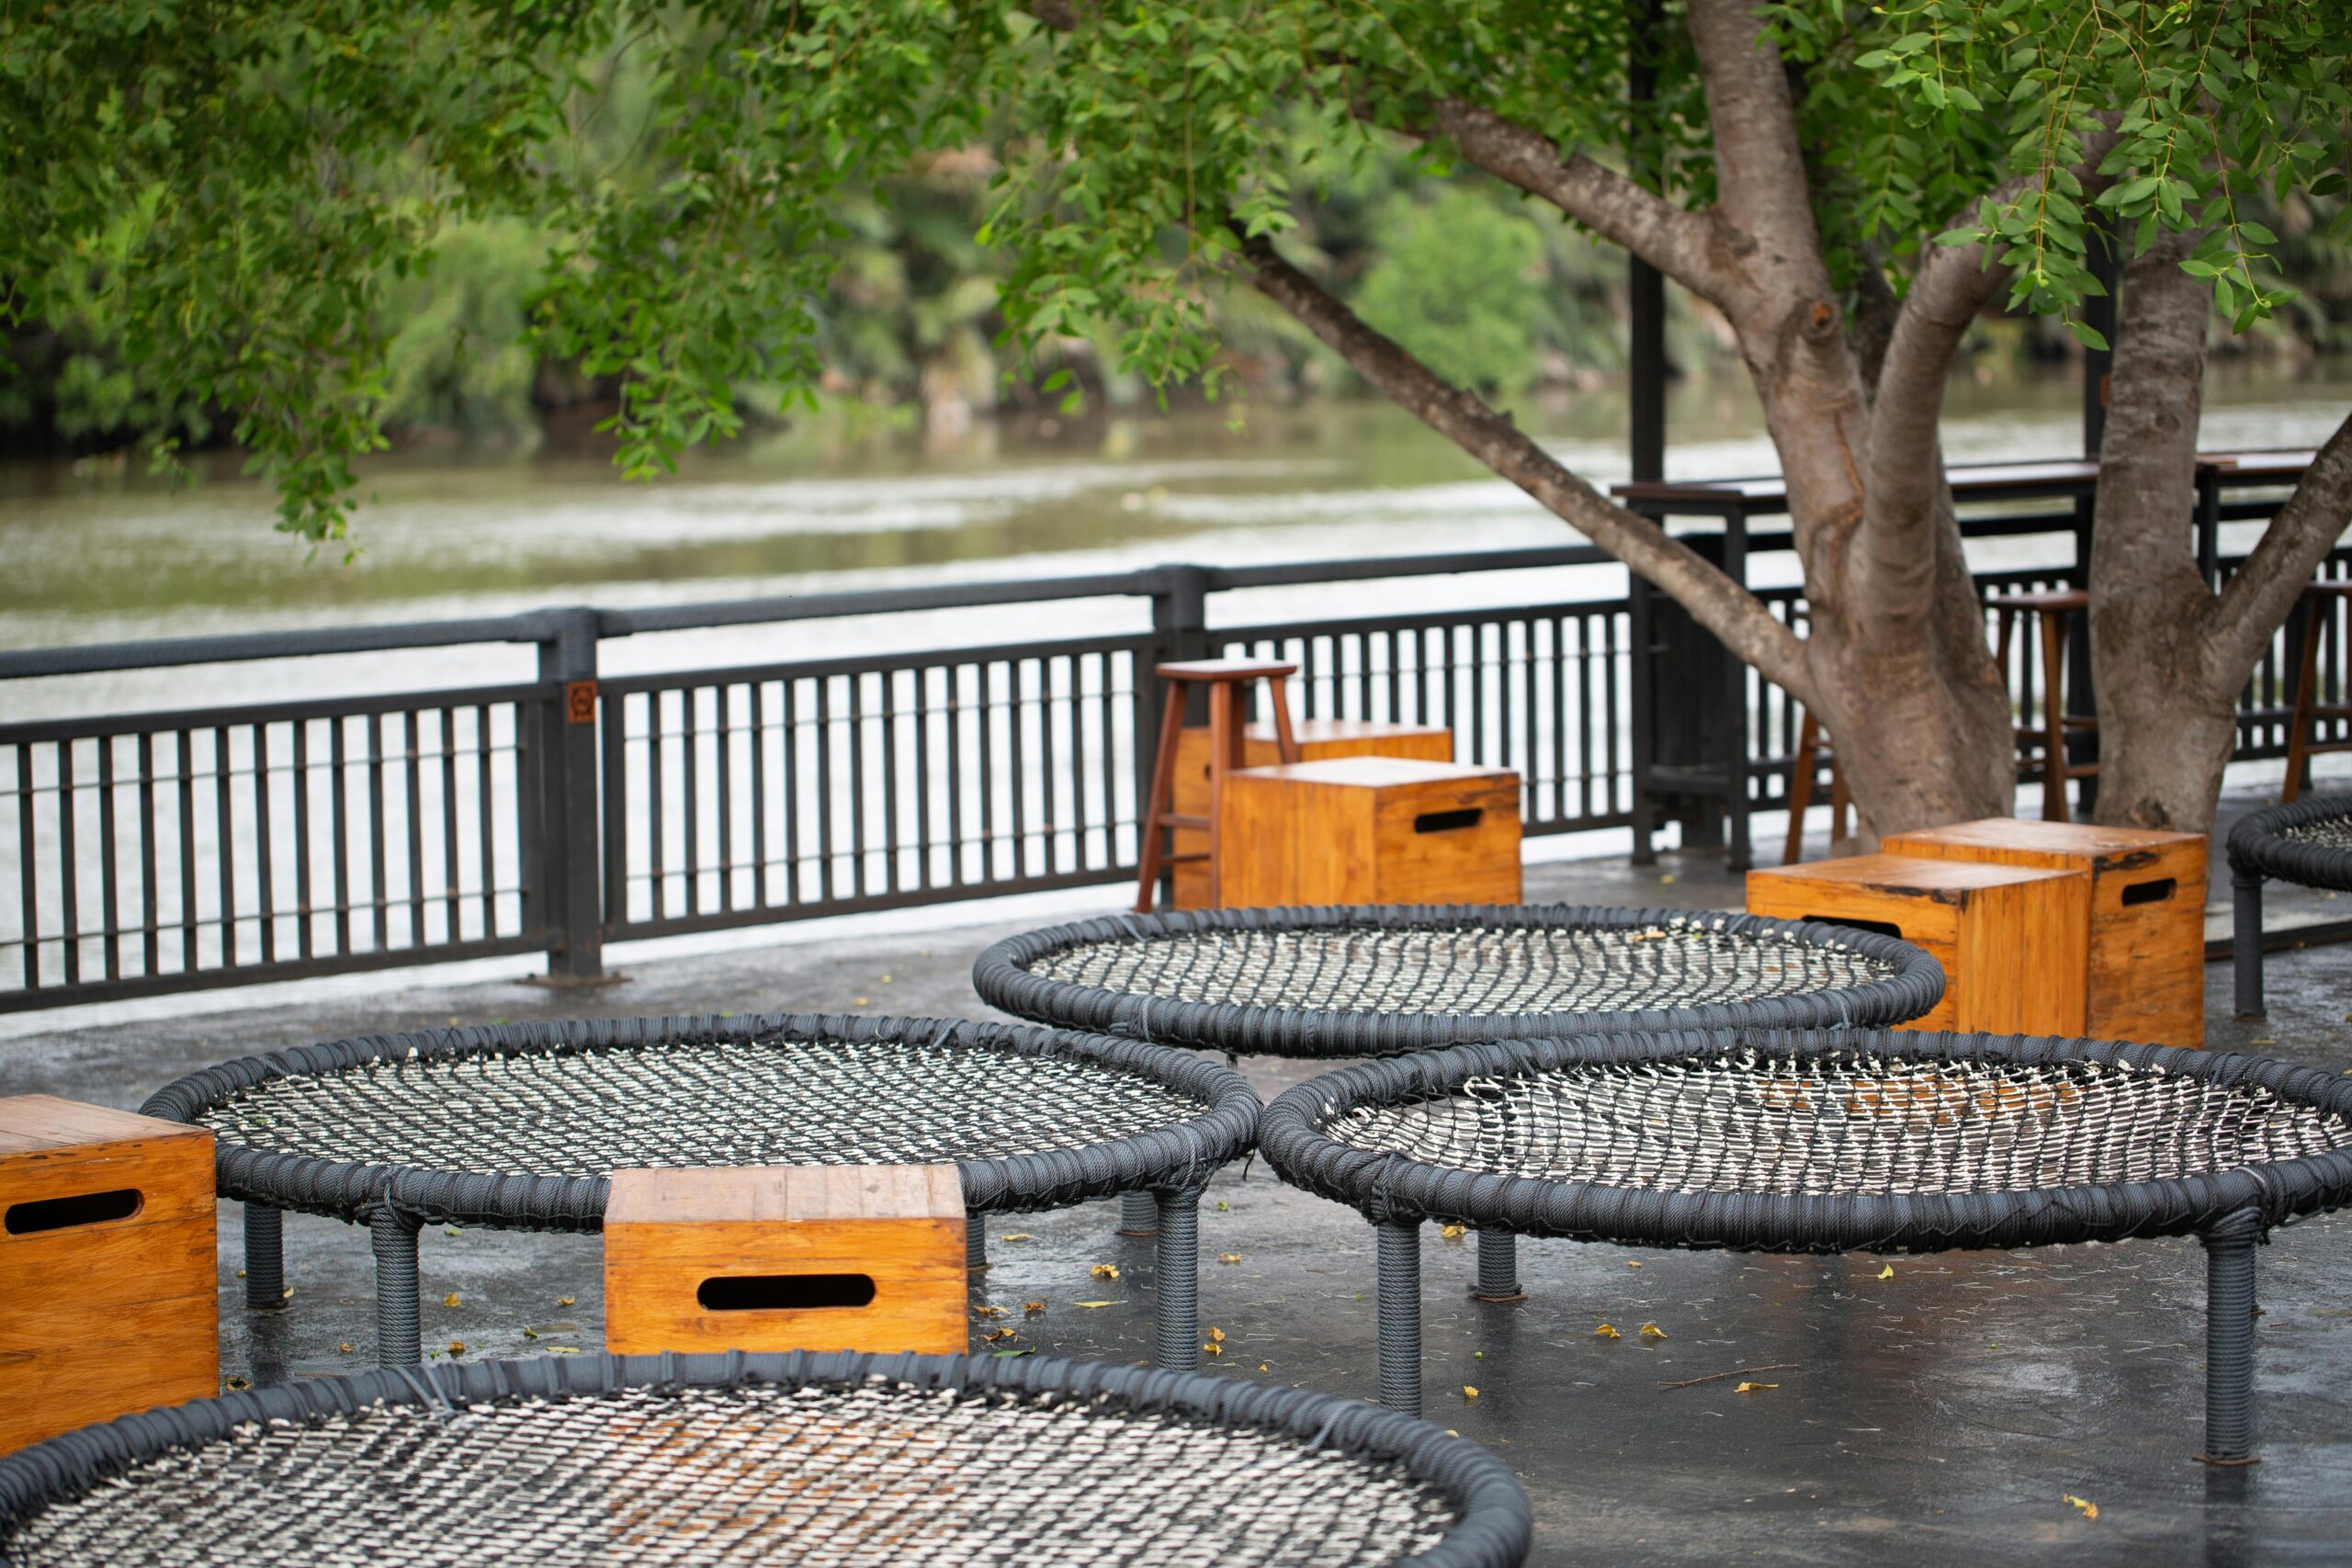 Outdoor seating area with round rope chairs and wooden side tables, situated near a metal railing along a riverbank. Experience the joy of movement while trees with green foliage provide shade.